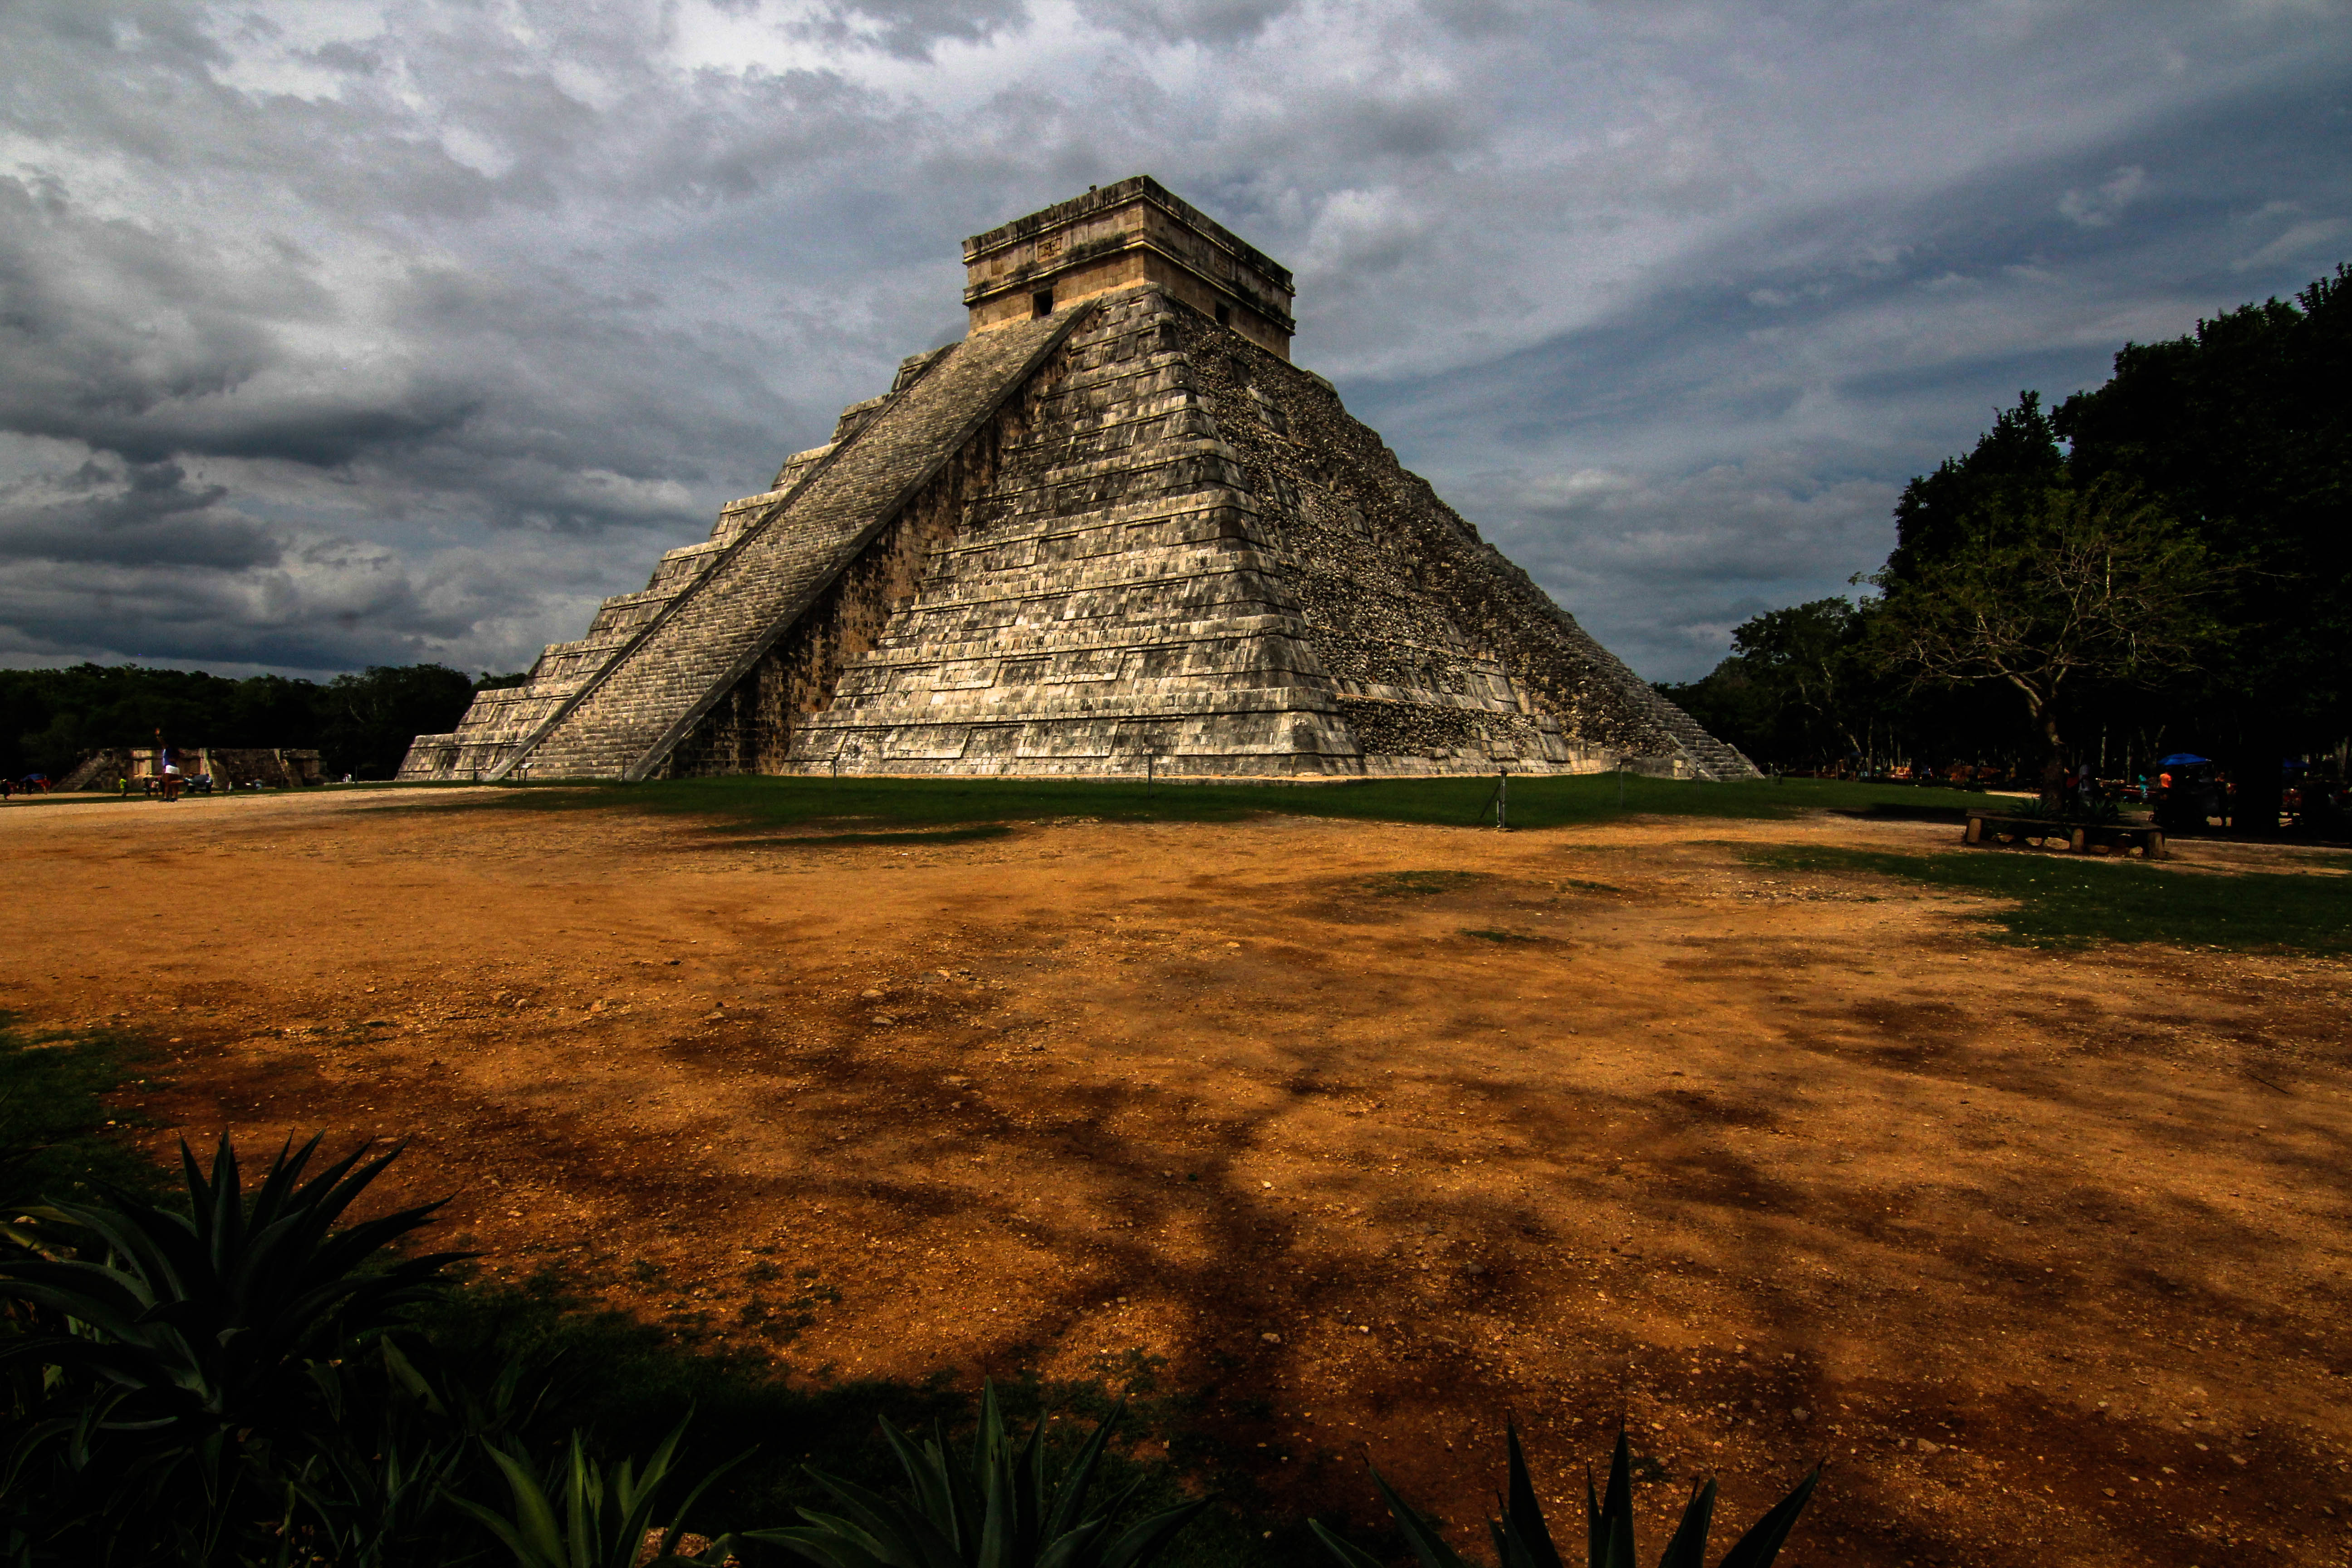 In the peninsula of Yucatan is the pyramid of Chichen Itza, a monument of Mayan civilization, built in 525 ac. In 1988 it was named World Heritage by UNESCO, and in 2007 it was recognized as one of the New Seven Wonders of the World.